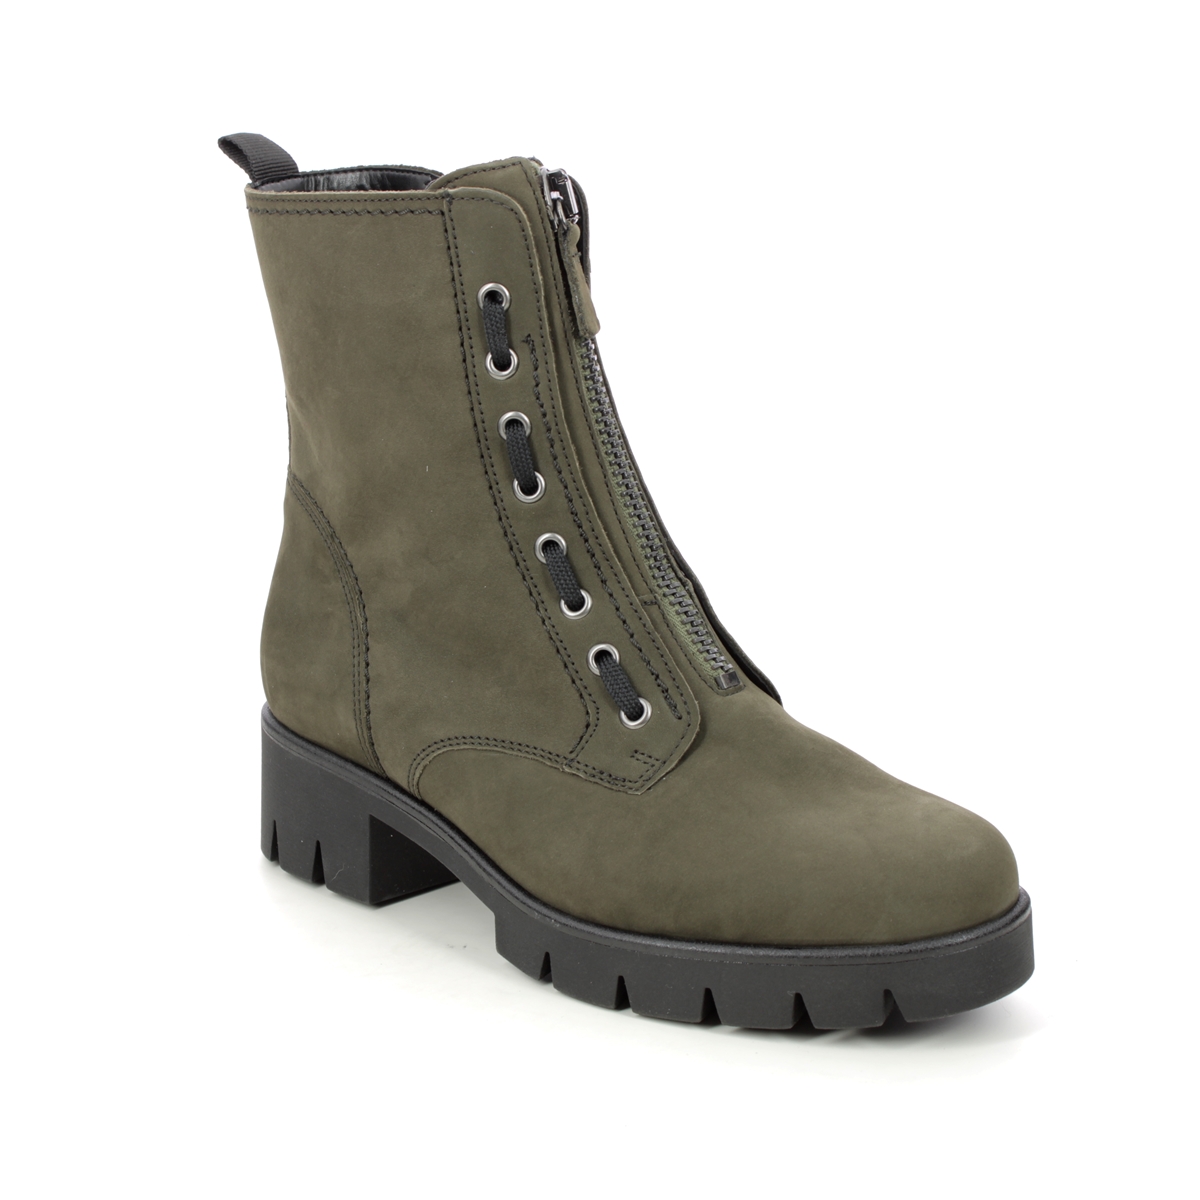 Gabor Banter Olive nubuck Womens Biker Boots 31.716.39 in a Plain Leather in Size 8